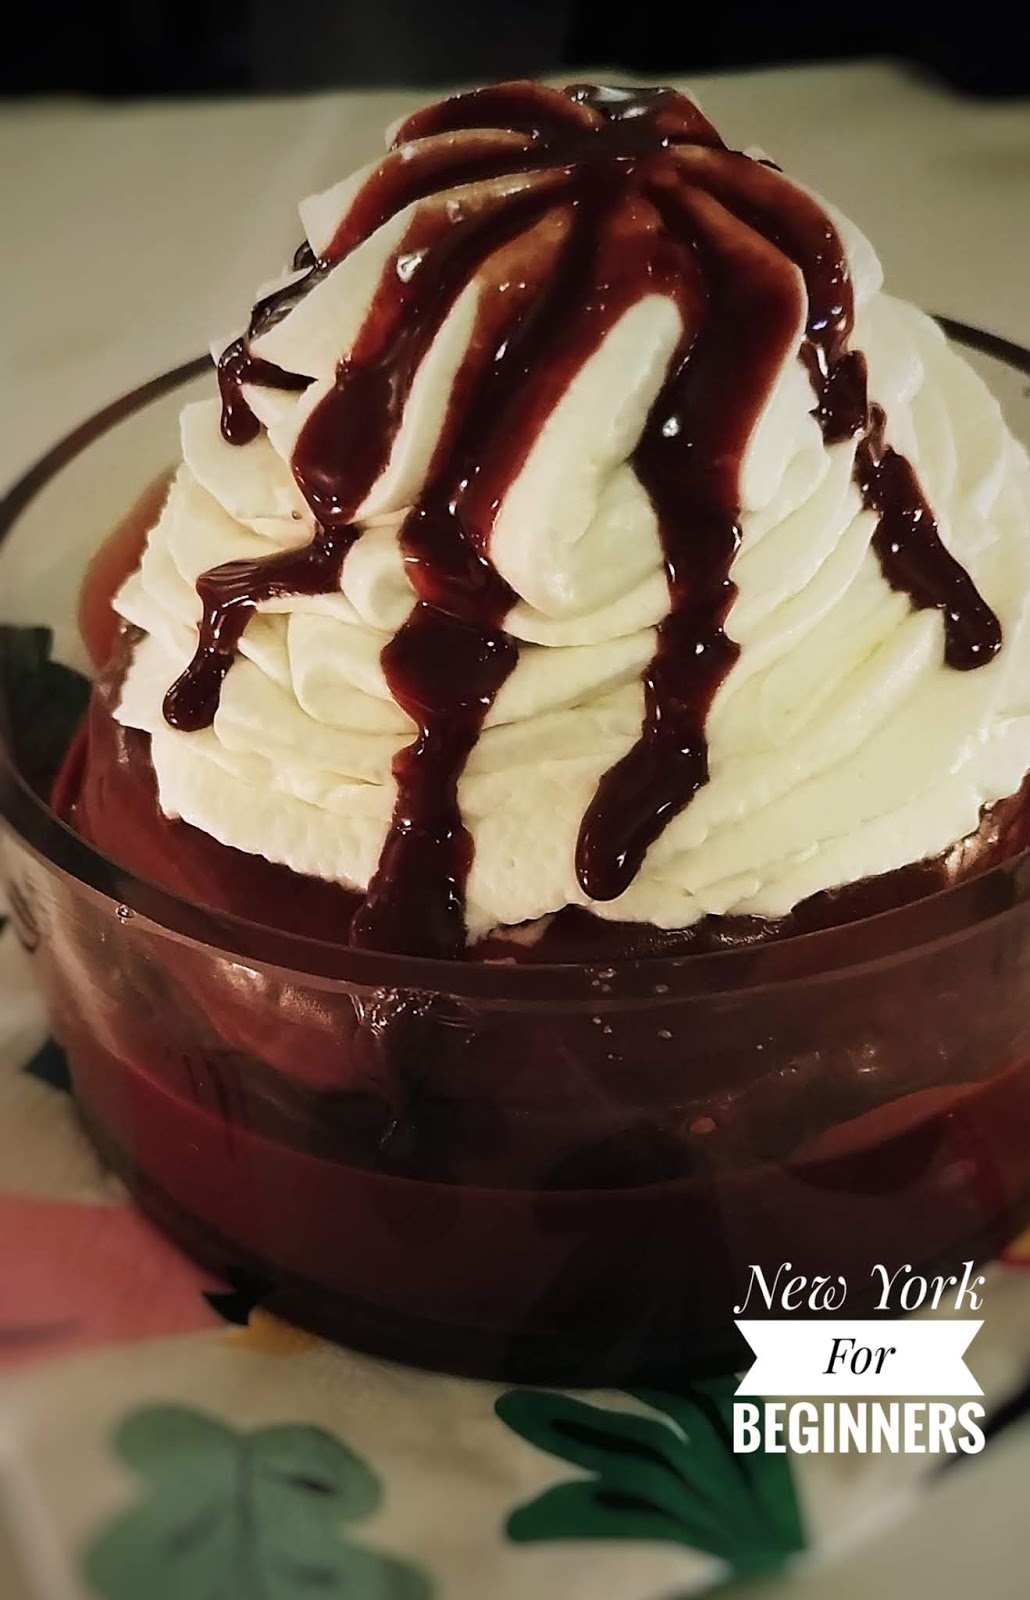 Image of the chocolate sundae served at T-Bar Steak & Lounge in NYC, a large portion of chocolate cake with hot chocolate sauce and whipped cream on top